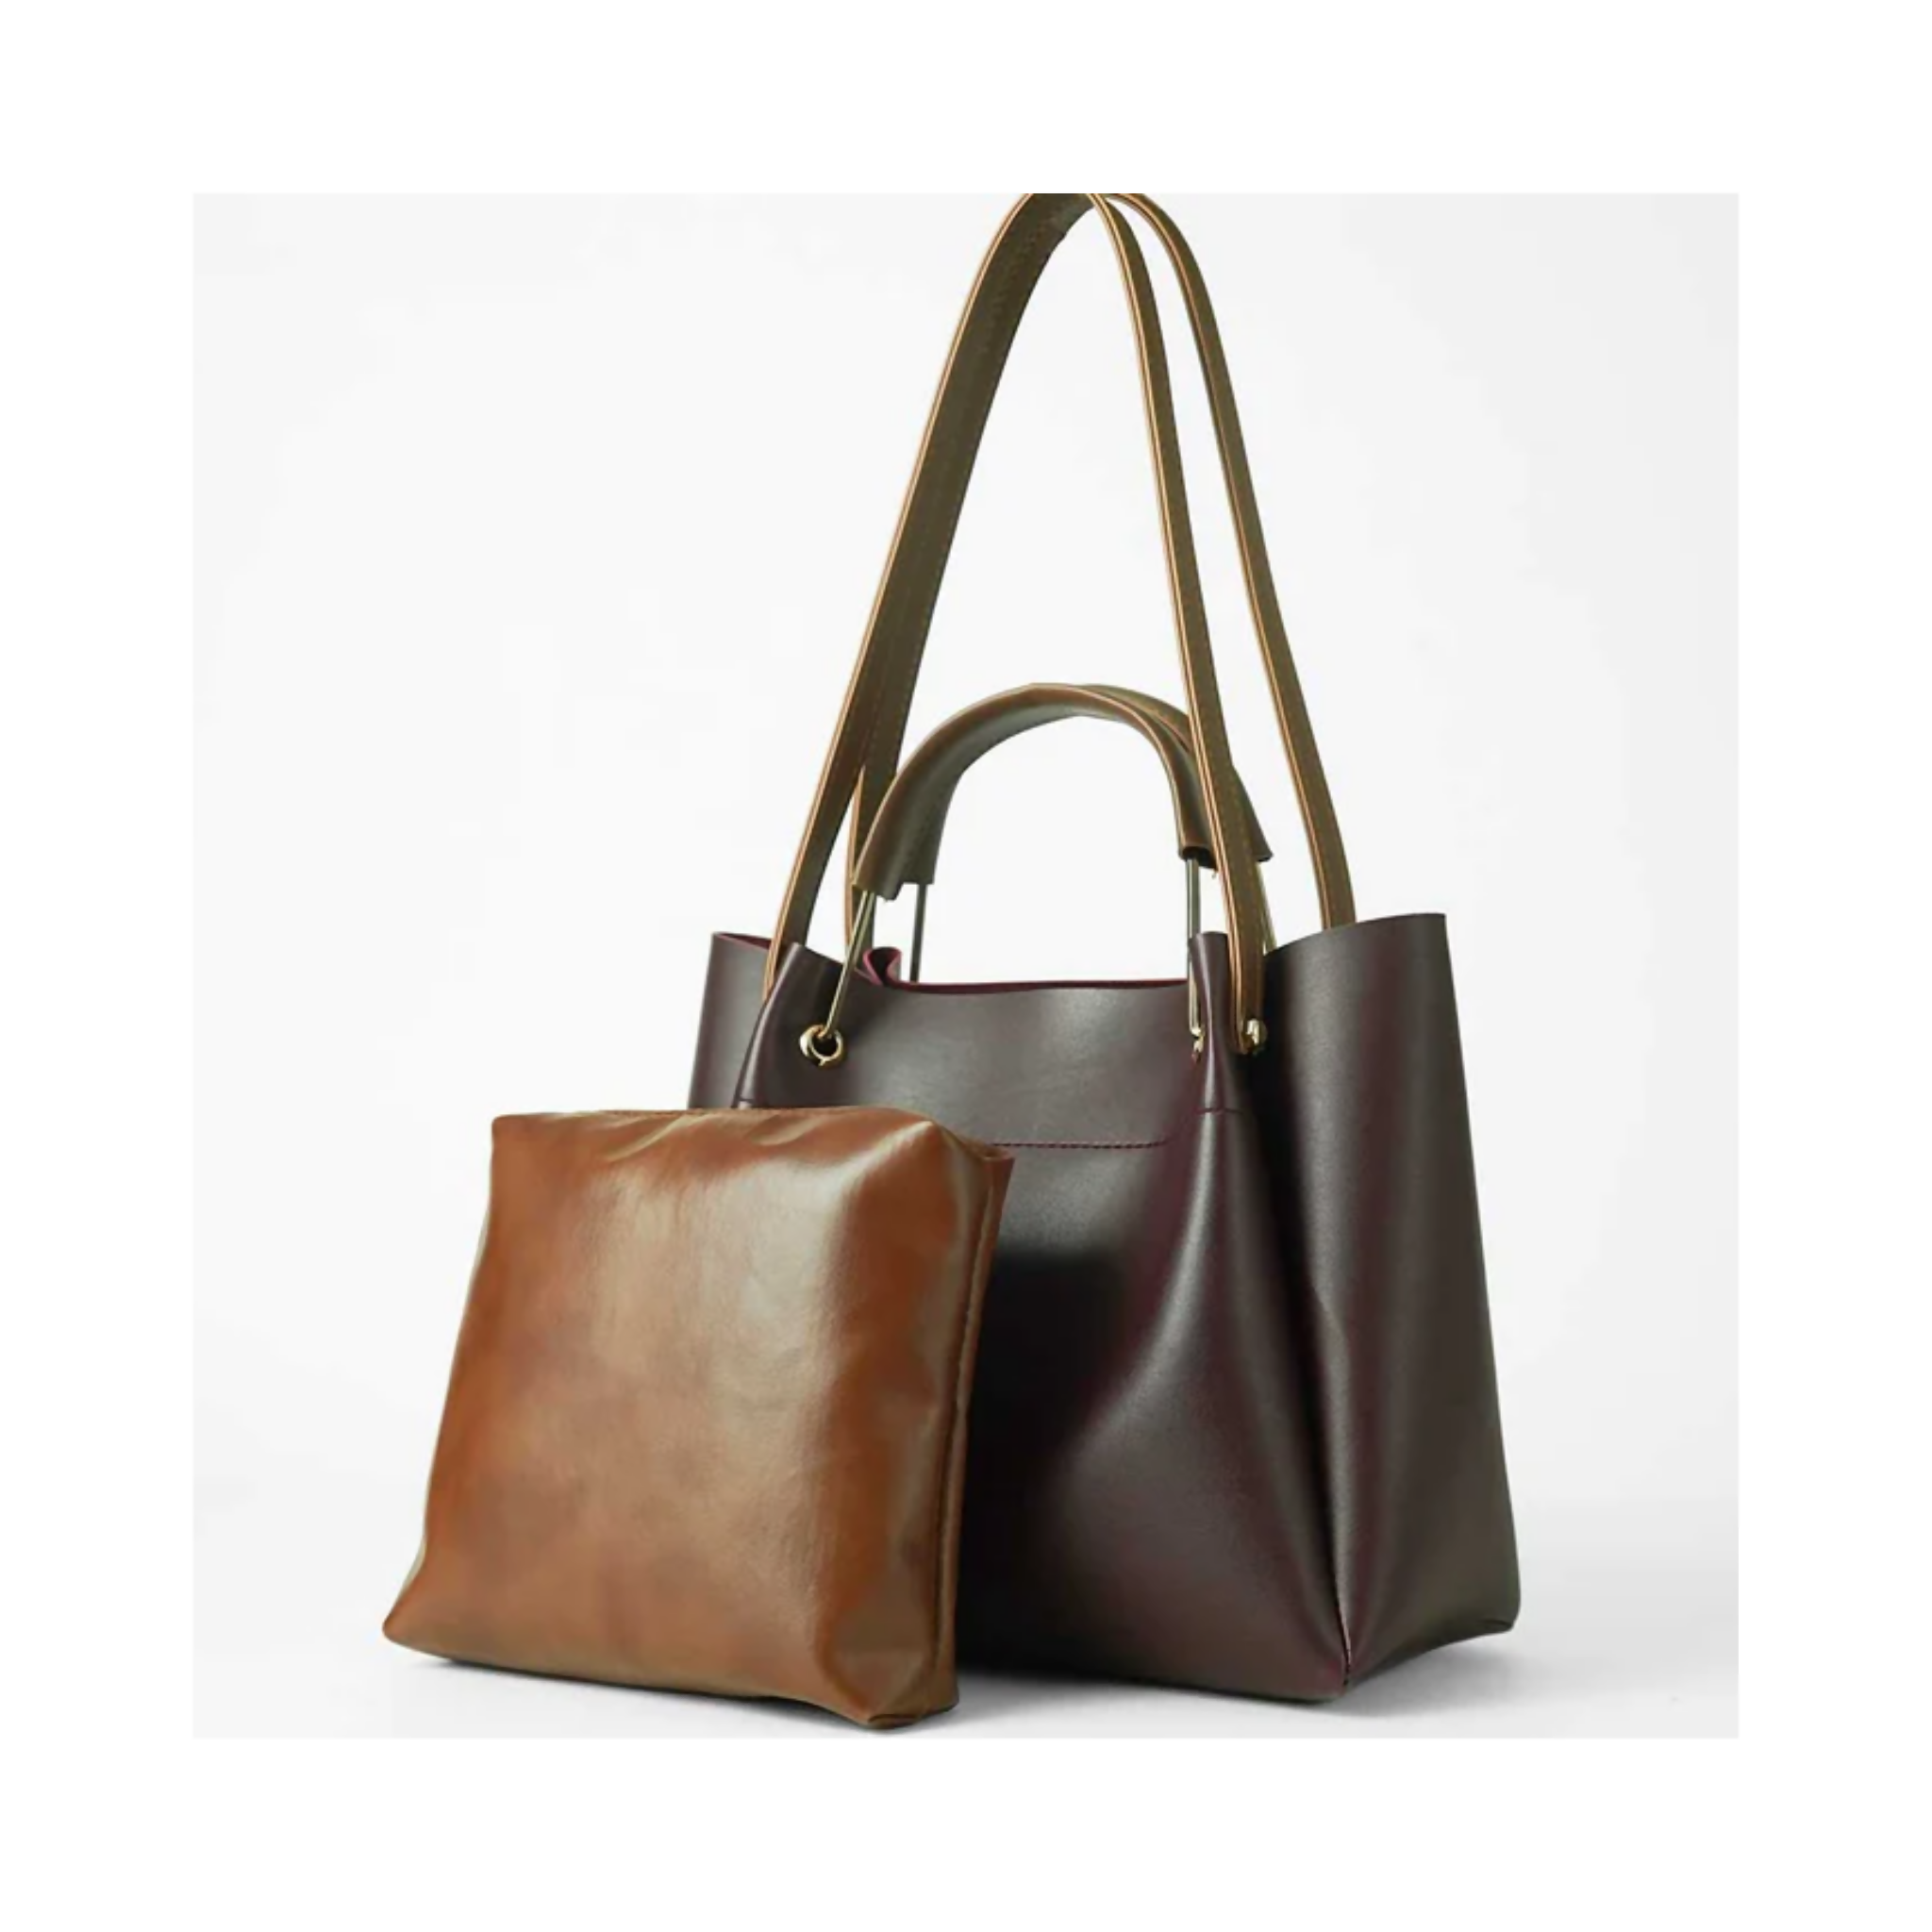 Emerald Bag, Sophisticated Brown & Elevate Your Style, for Ladies